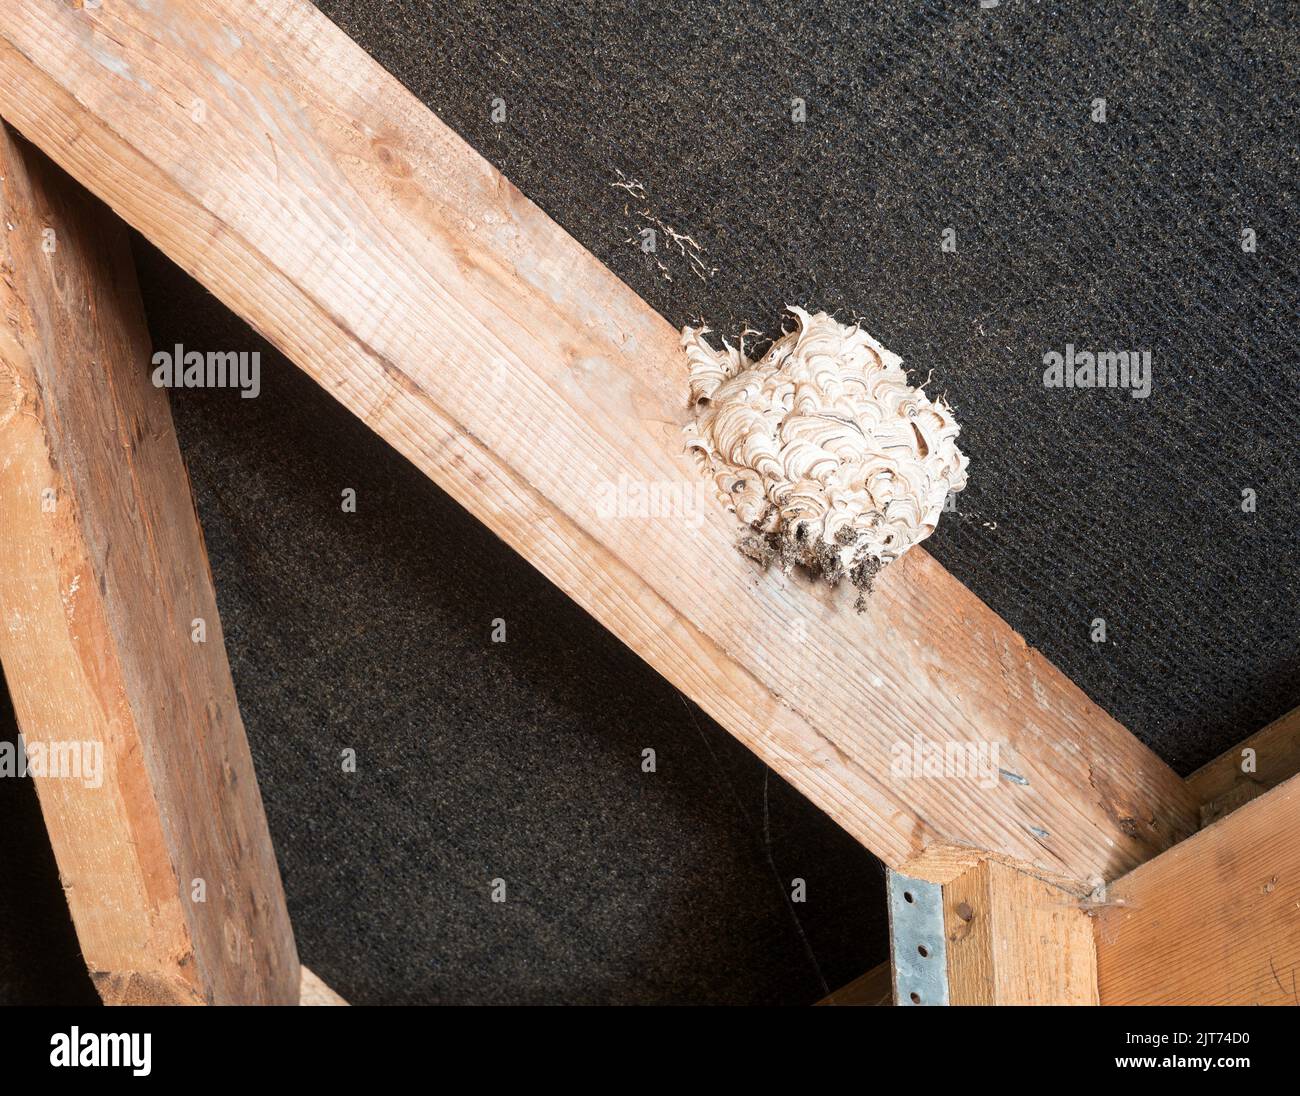 A wasp's next within the roof space of a building Stock Photo